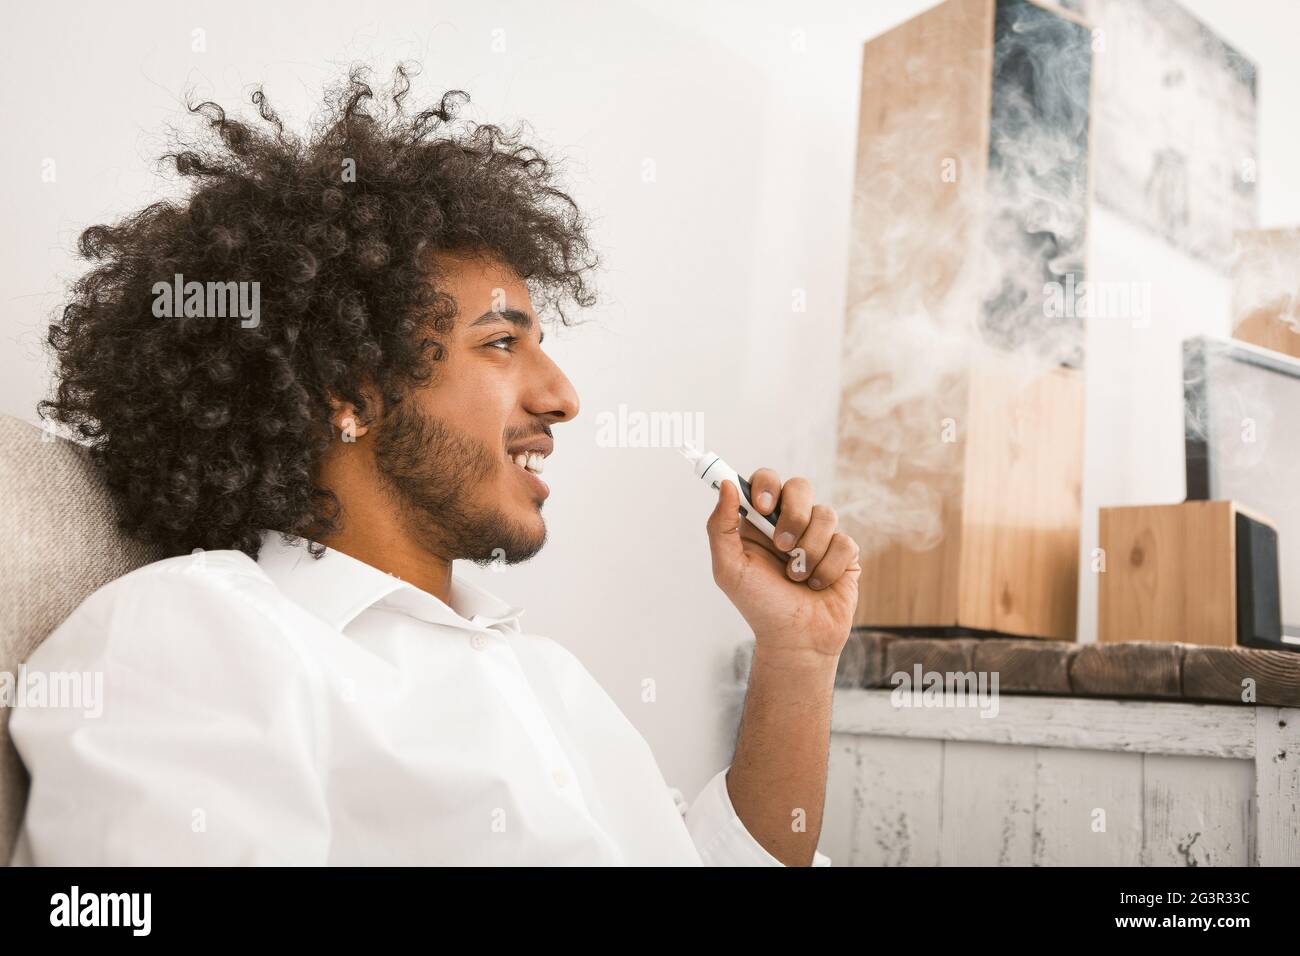 Shaggy man rests smoking e-cigarette. Smiling sun-tanned guy admires looking at smoke clouds. Alternative smoking concept. Side Stock Photo